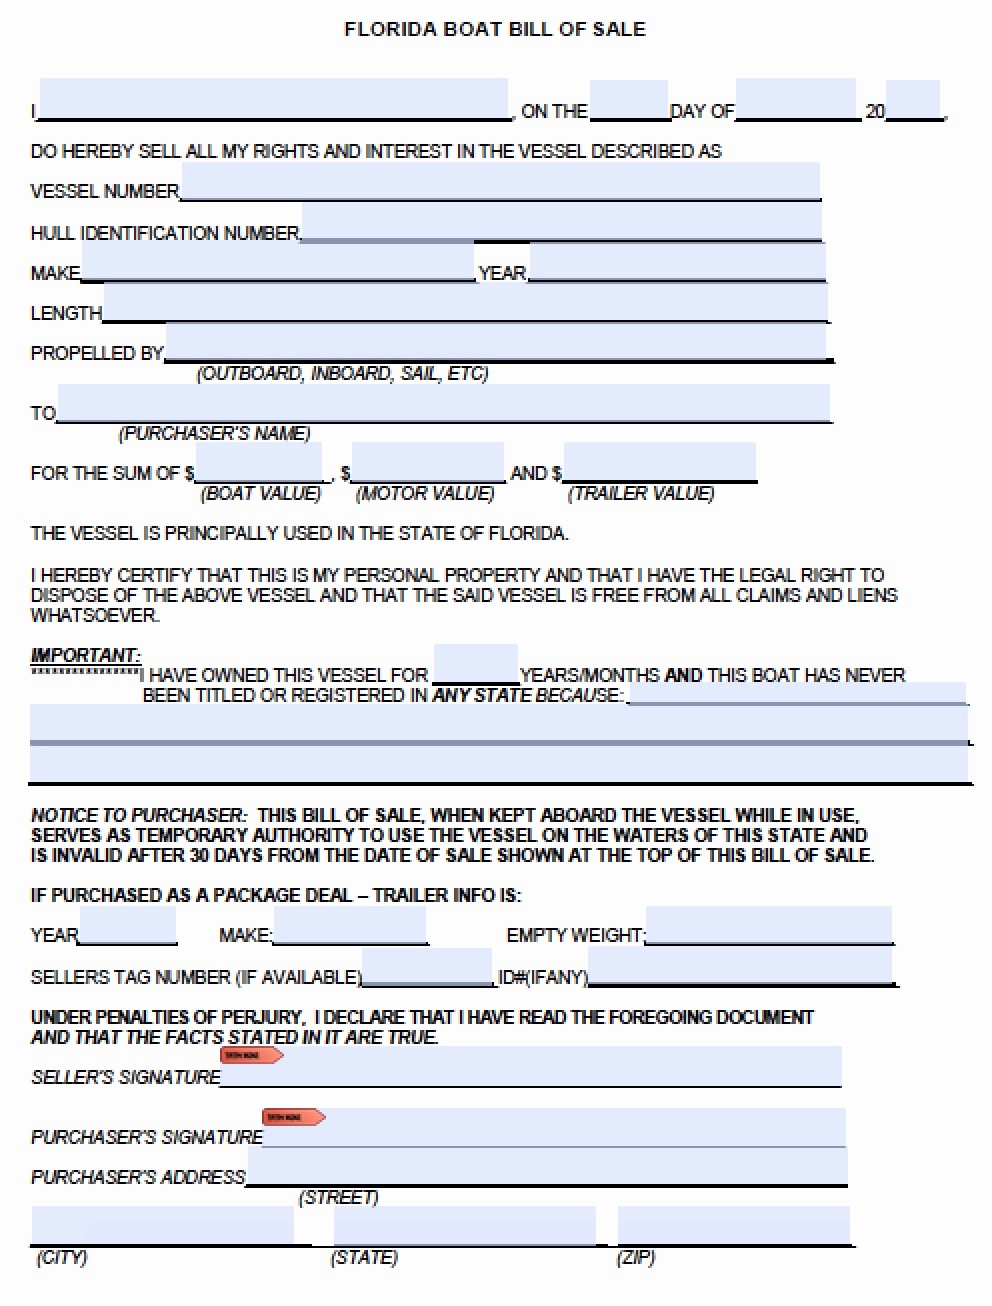 Automotive Bill Of Sale Florida Awesome Free Florida Boat Bill Of Sale form Pdf